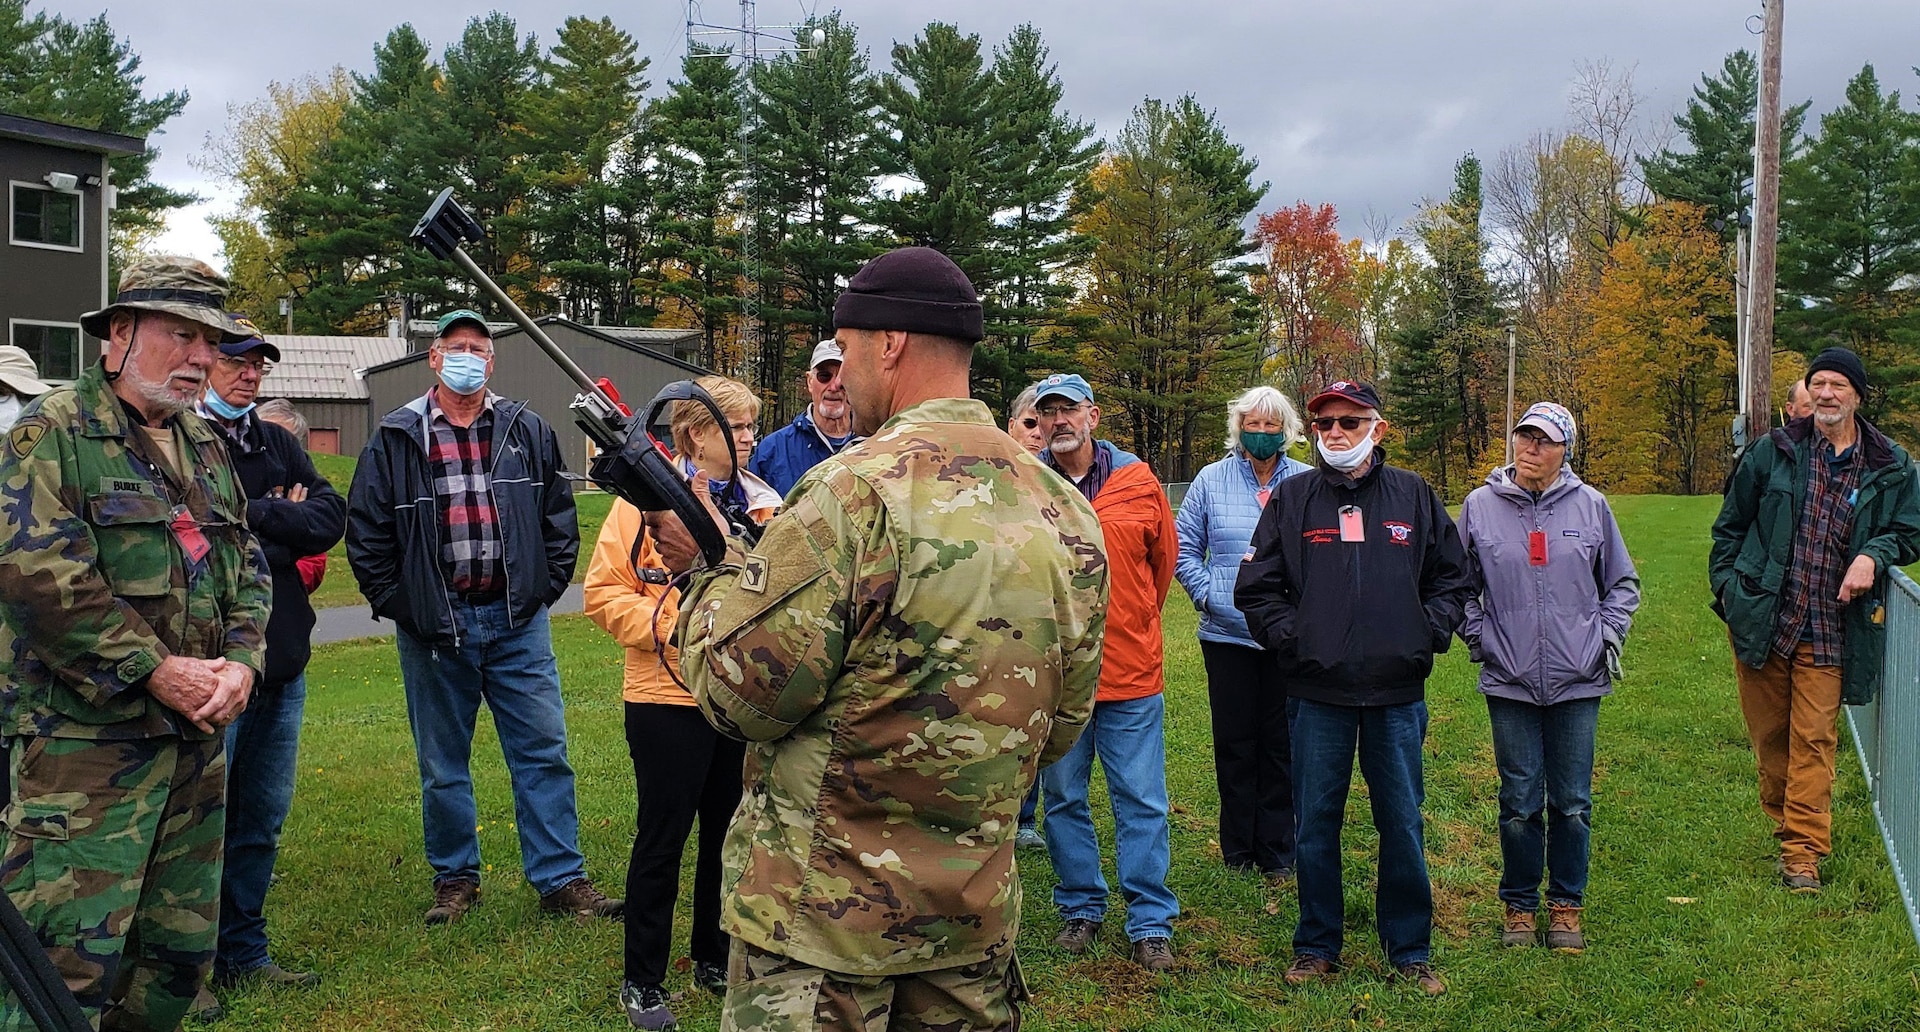 Master Sgt. Daniel Westover, coach, National Guard Biathlon Program, describes the rifle used by biathletes in competition at Camp Ethan Allen Training Site, Oct. 22, 2021. Military retirees and neighbors of the range, among others, participated in a public tour of CEATS where they received an overview of range operations and visited military barracks; construction of a new Army Mountain Warfare School; weapon ranges; and the biathlon program. (U.S. Army photo by Maj. J. Scott Detweiler)